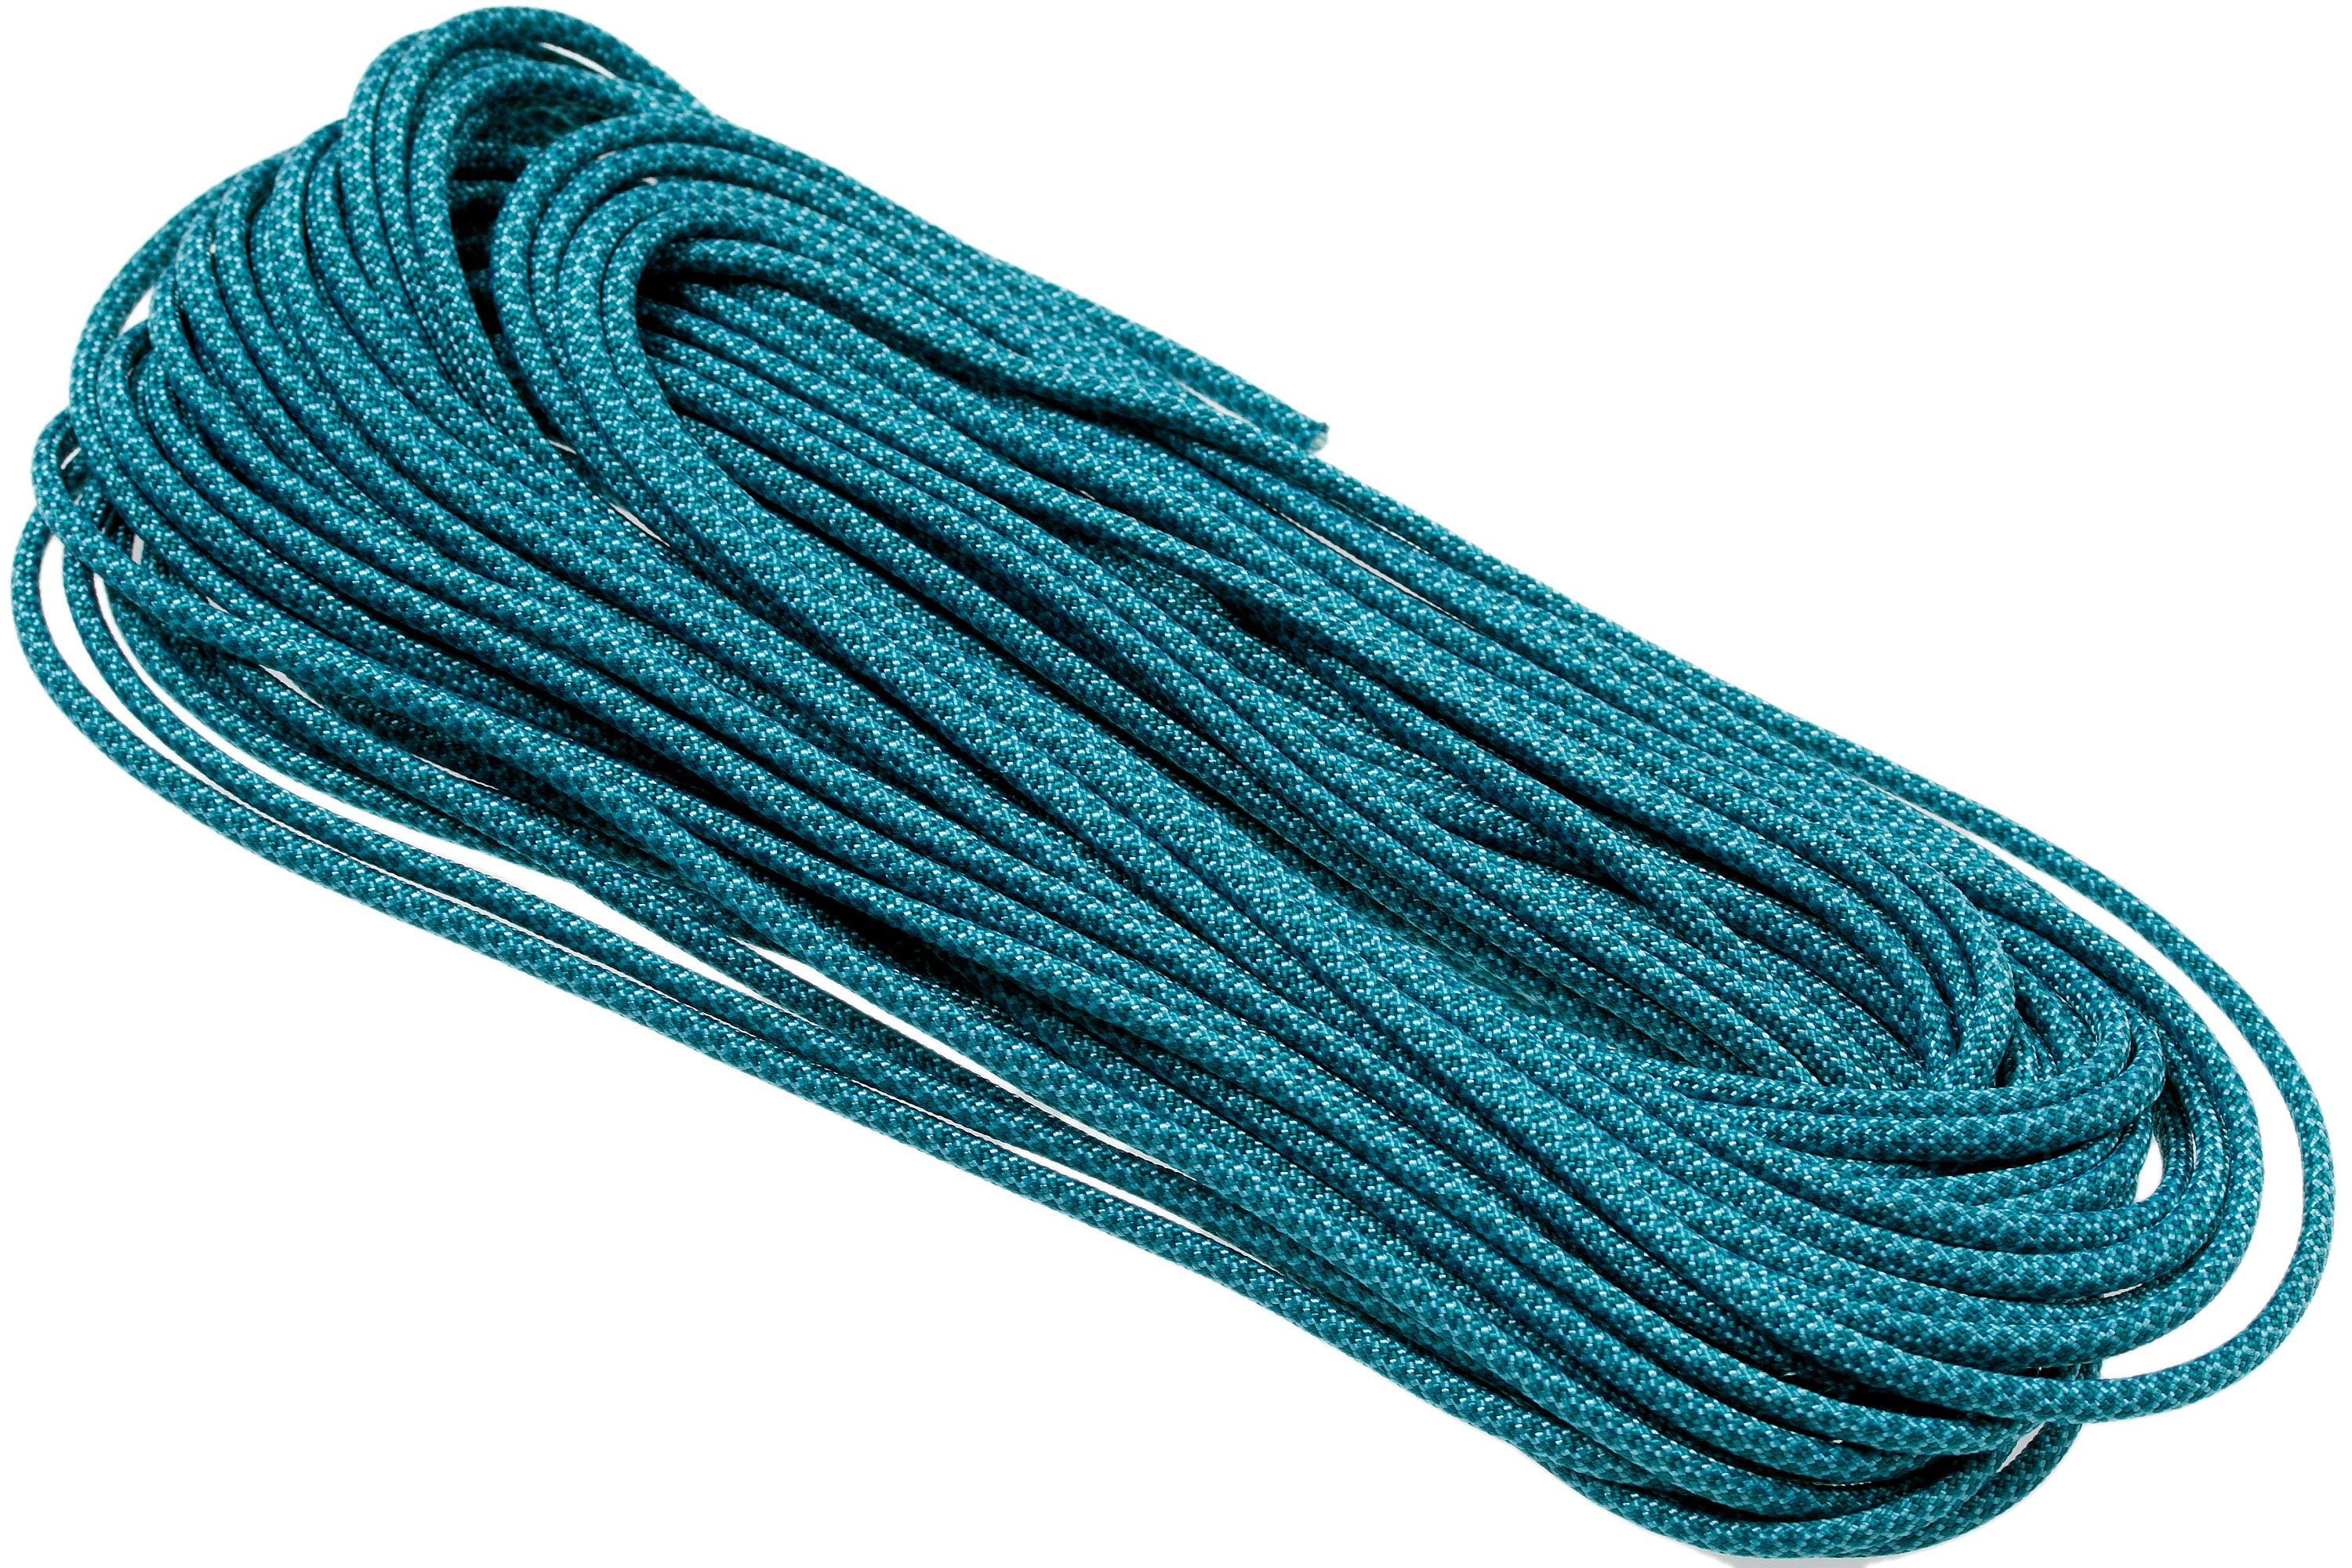 Knivesandtools 550 paracord type III, colour: neon turquoise with chocolate  diamonds - 50 ft (15.24 meters)